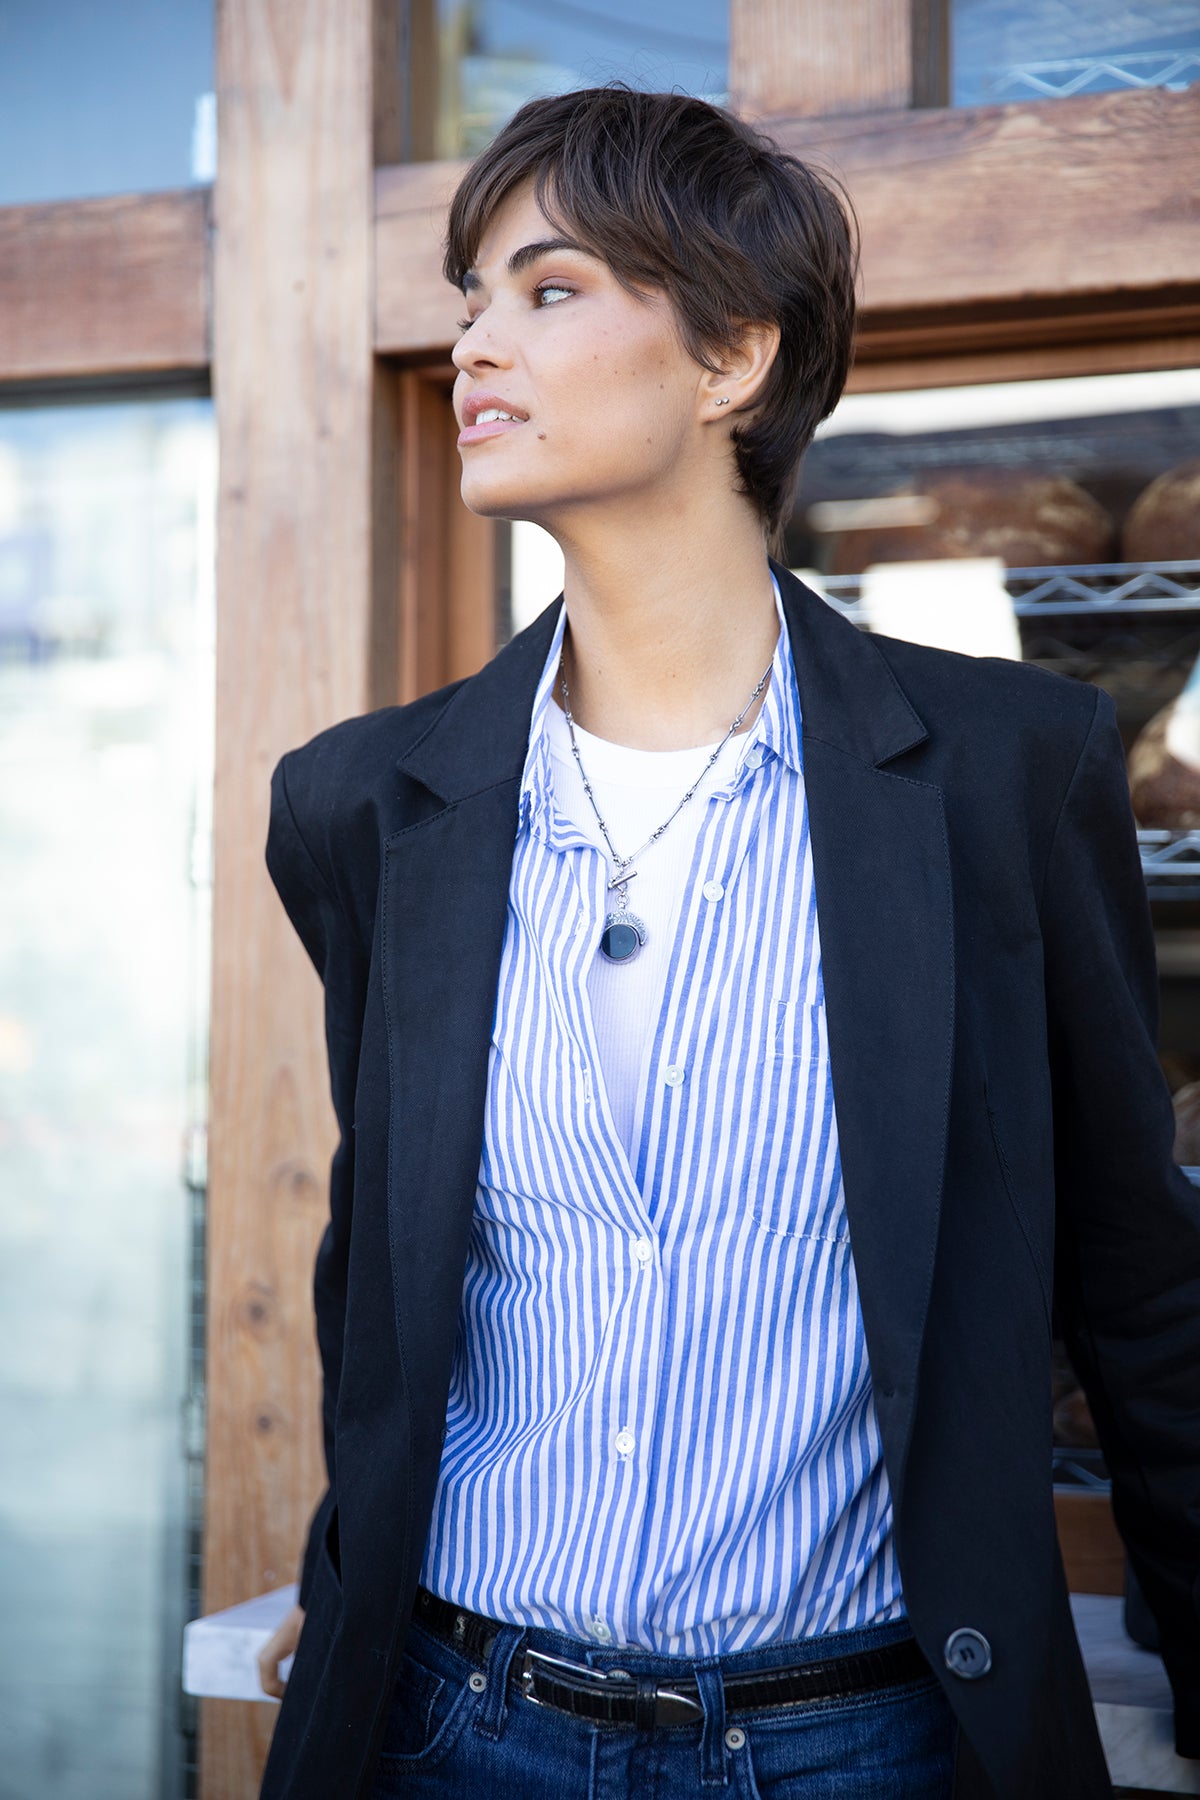 Newport Blue and White Stripe Button Down Cotton Shirt with Echo Blazer in Vintage Black and Cruz Tank Top in White Front-25154865365185